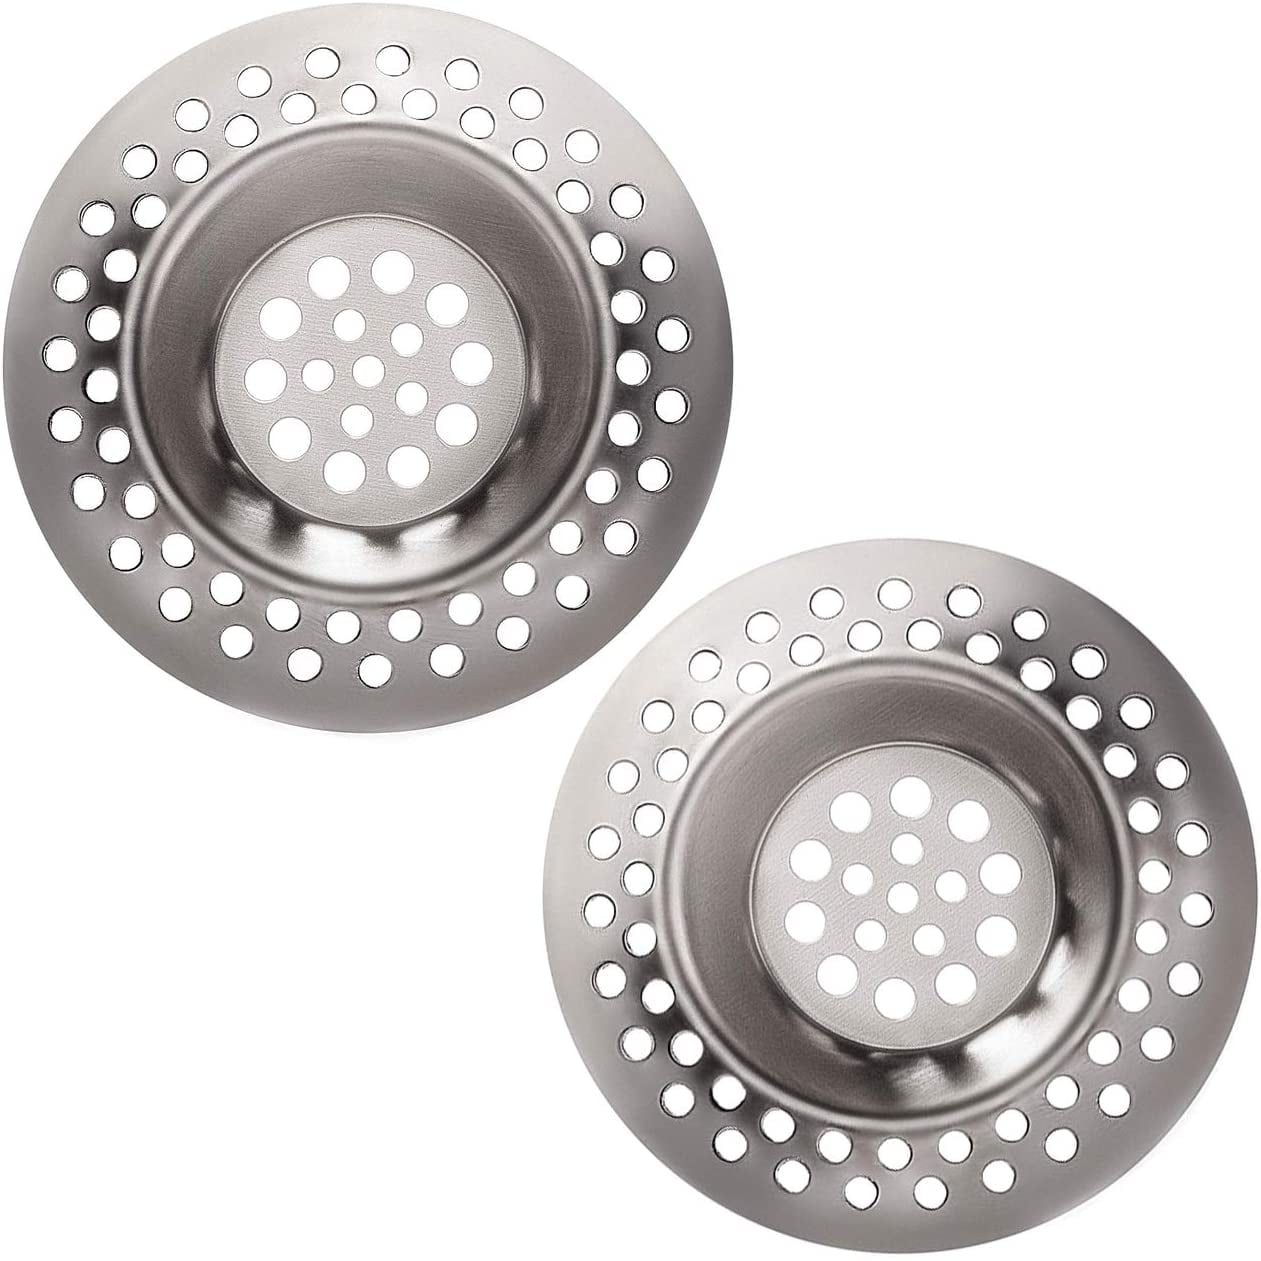 3Pcs Sink Strainer Small,Metal Drain Cover Hair Catcher For Sink & Bathroom. 